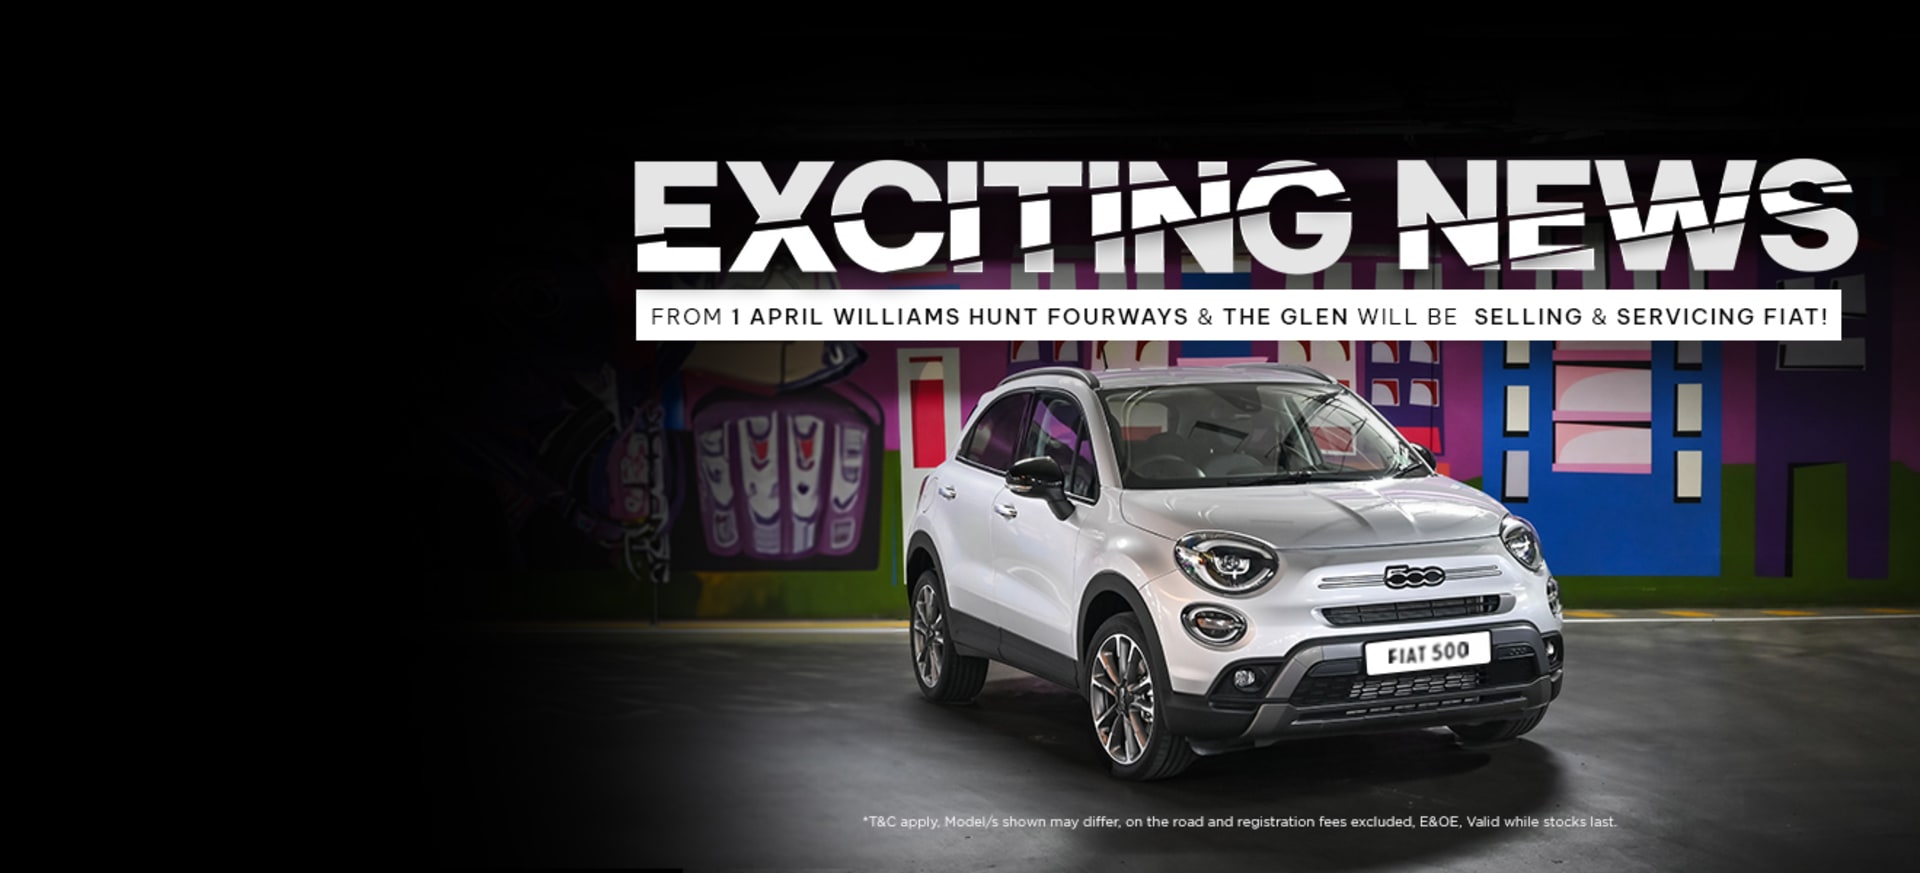 Williams Hunt Fourways and The Glen Fiat Franchise